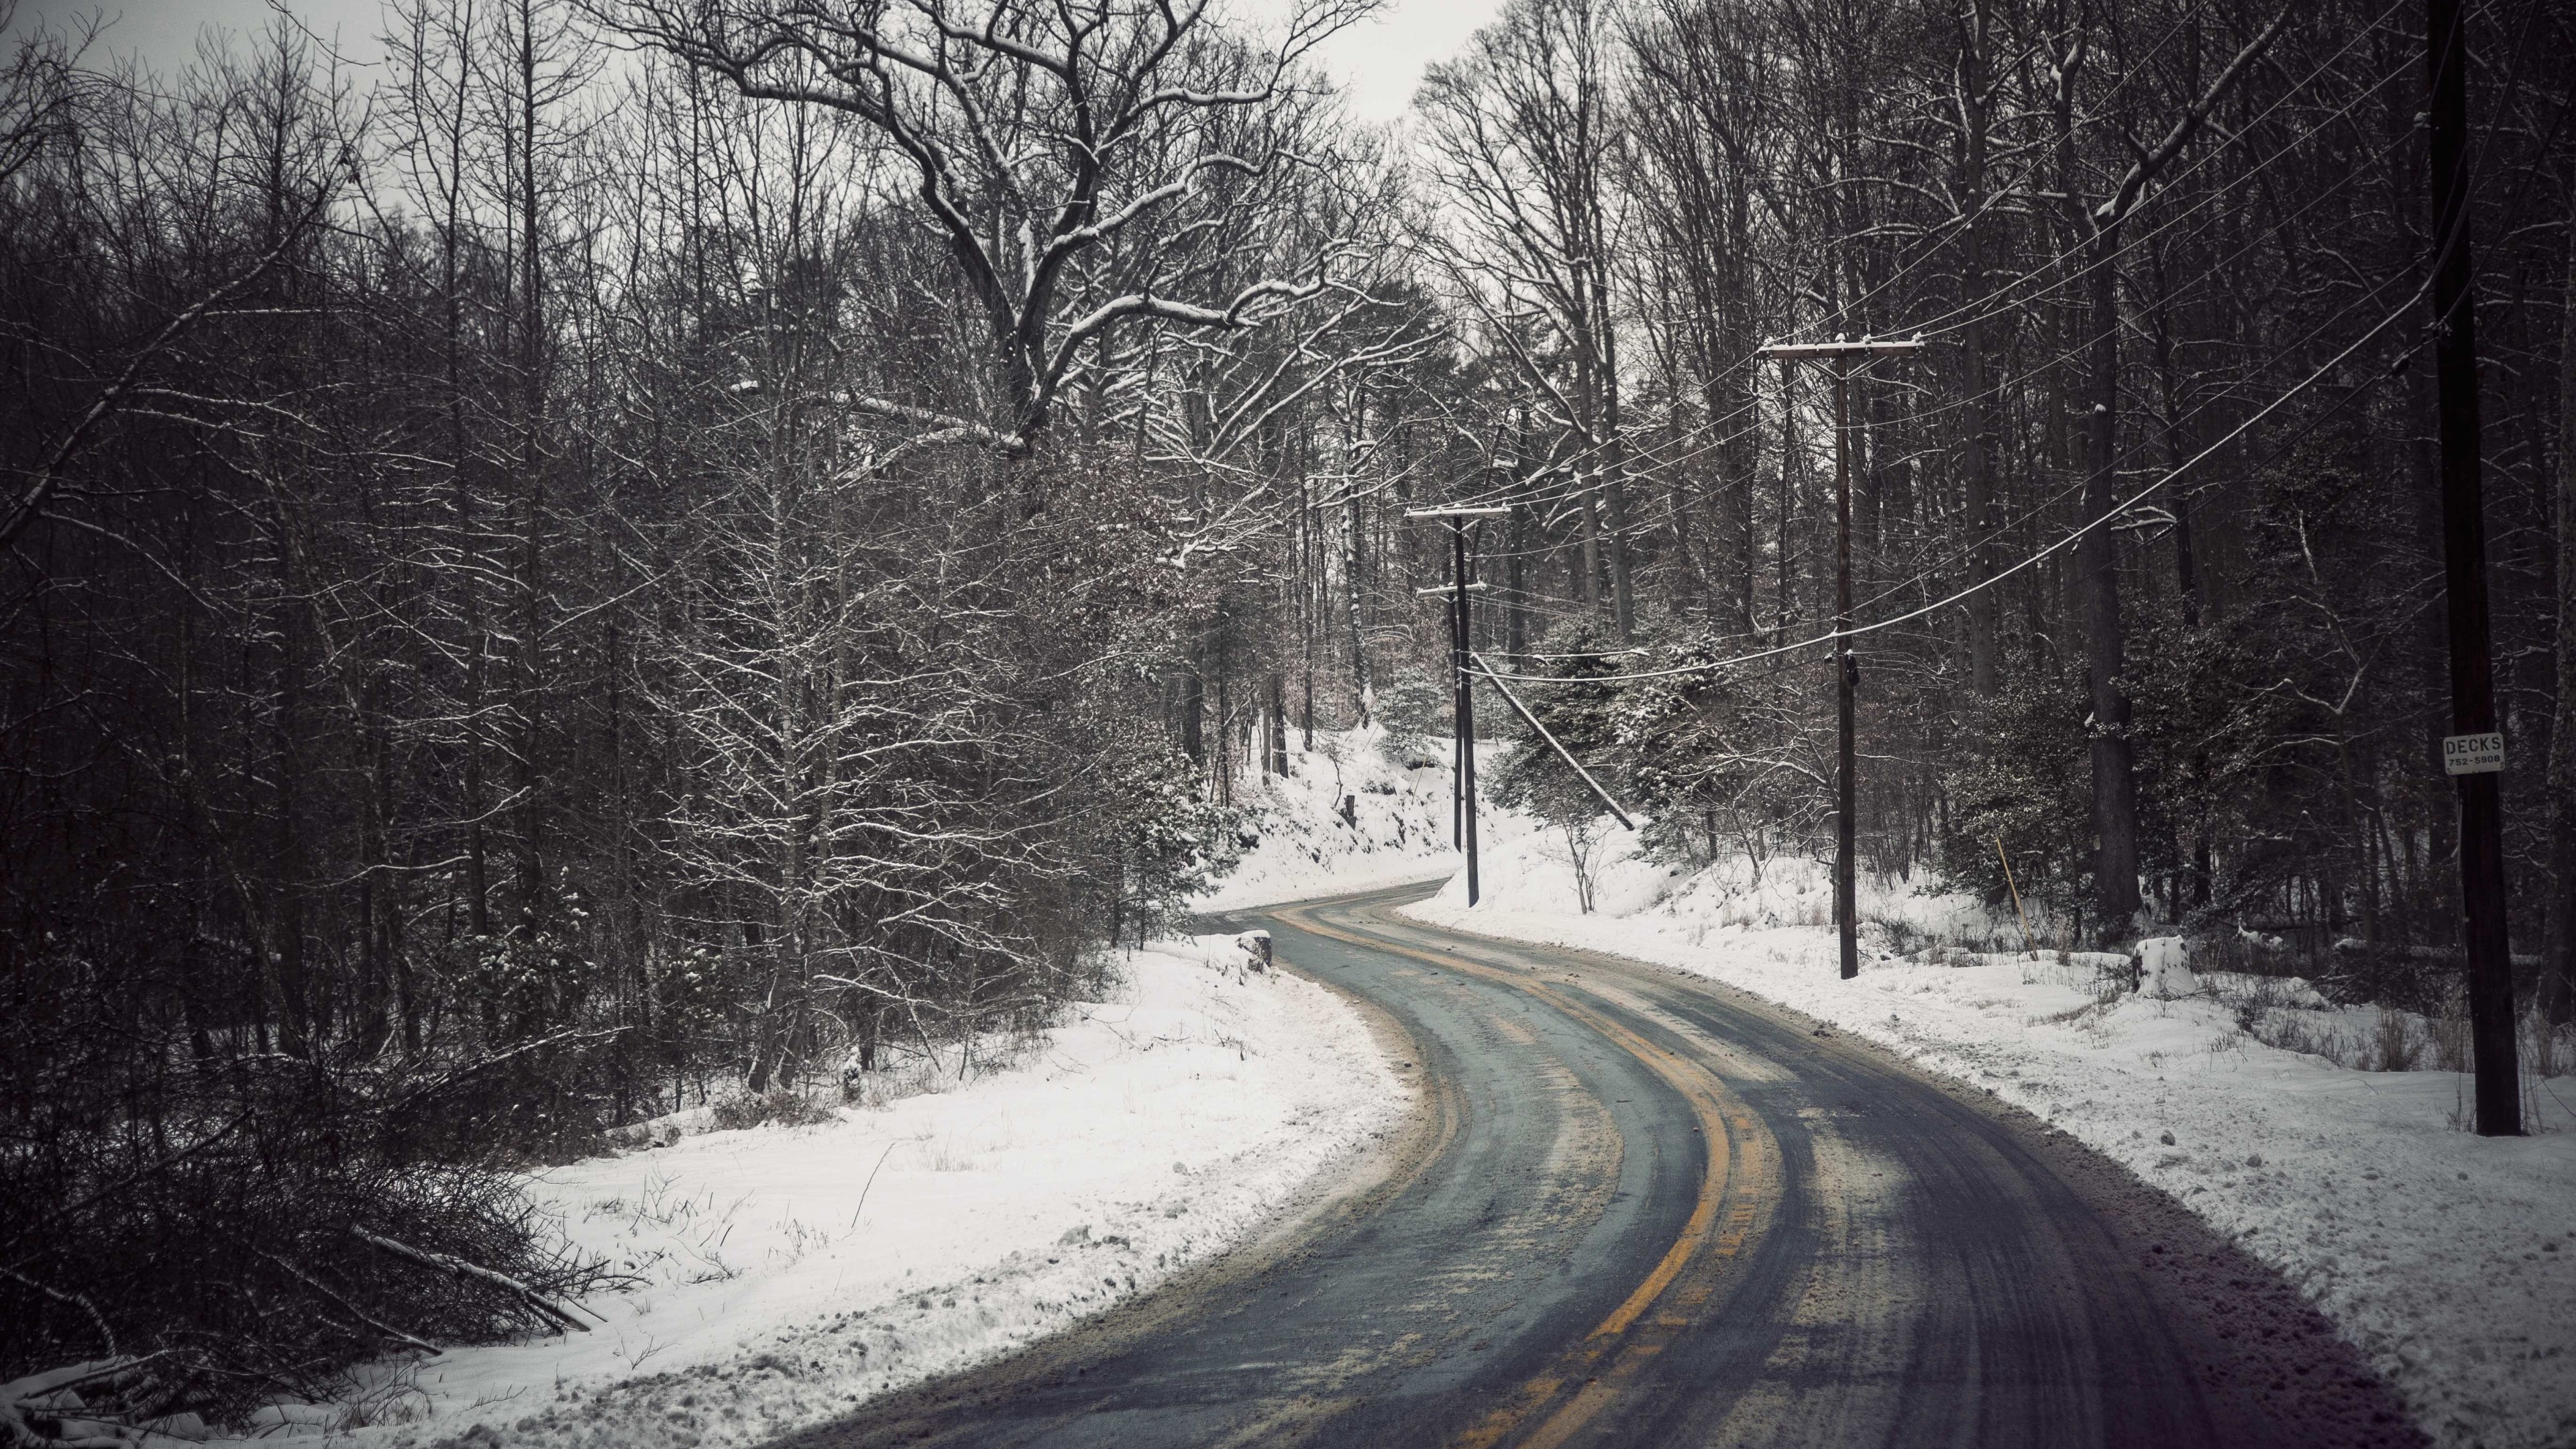 General 3840x2160 landscape mountains winter snow road nature forest gray